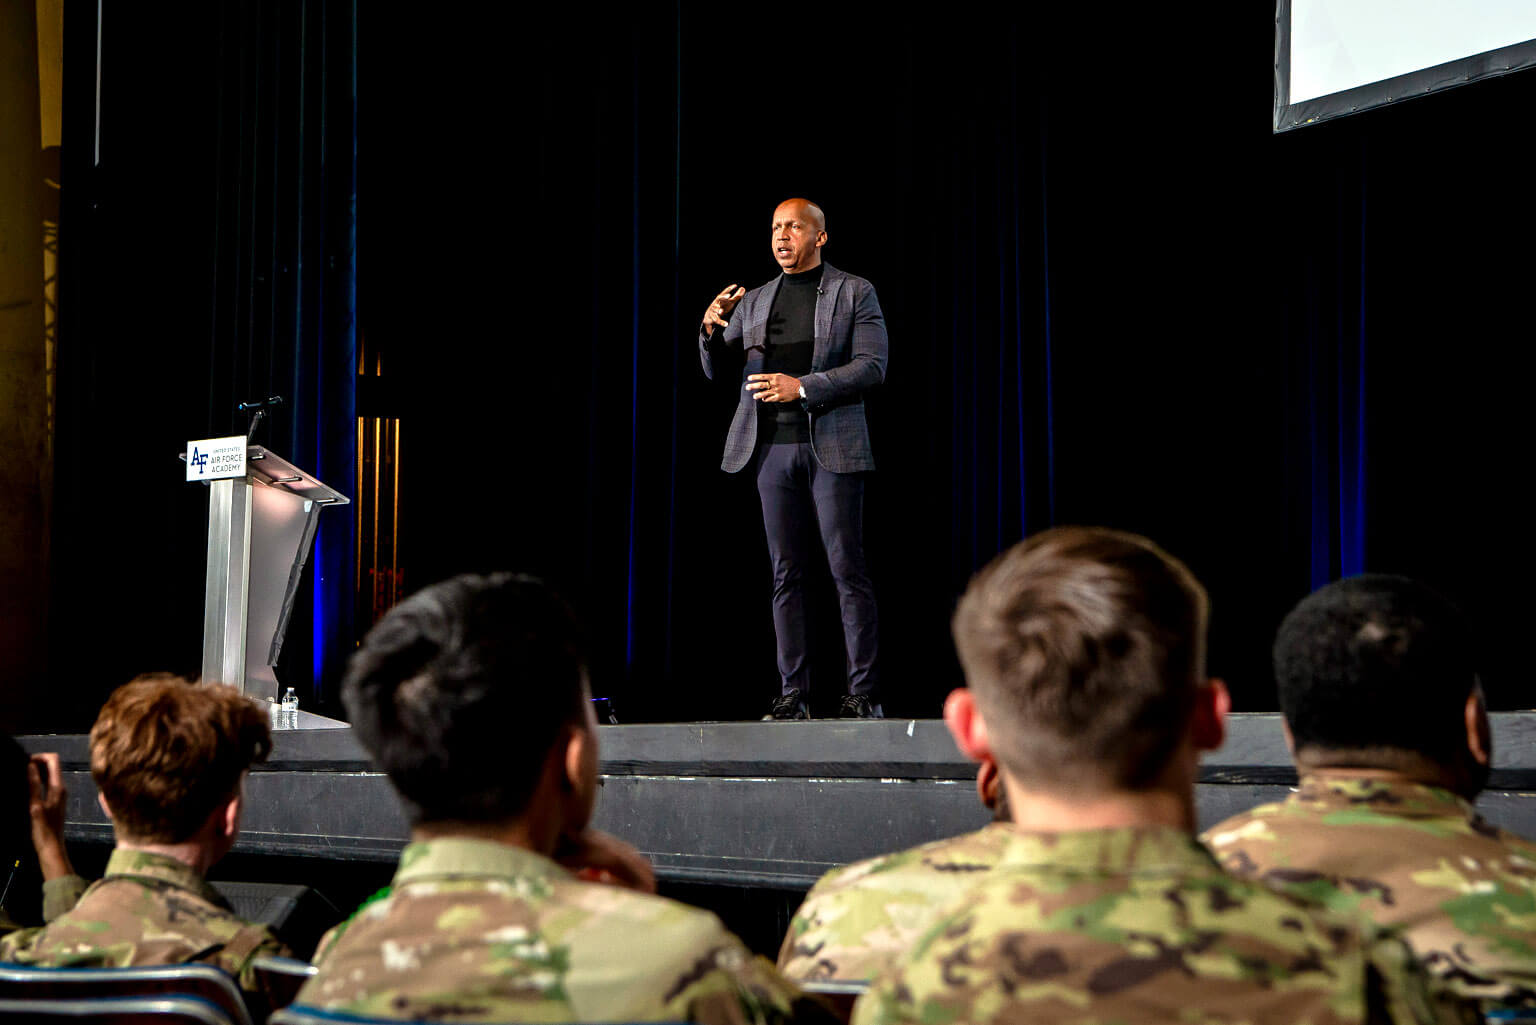 Equal Justice Initiative founder Bryan Stevenson speaks at the Colvin Keynote Lecture for the 31st annual National Character and Leadership Symposium.